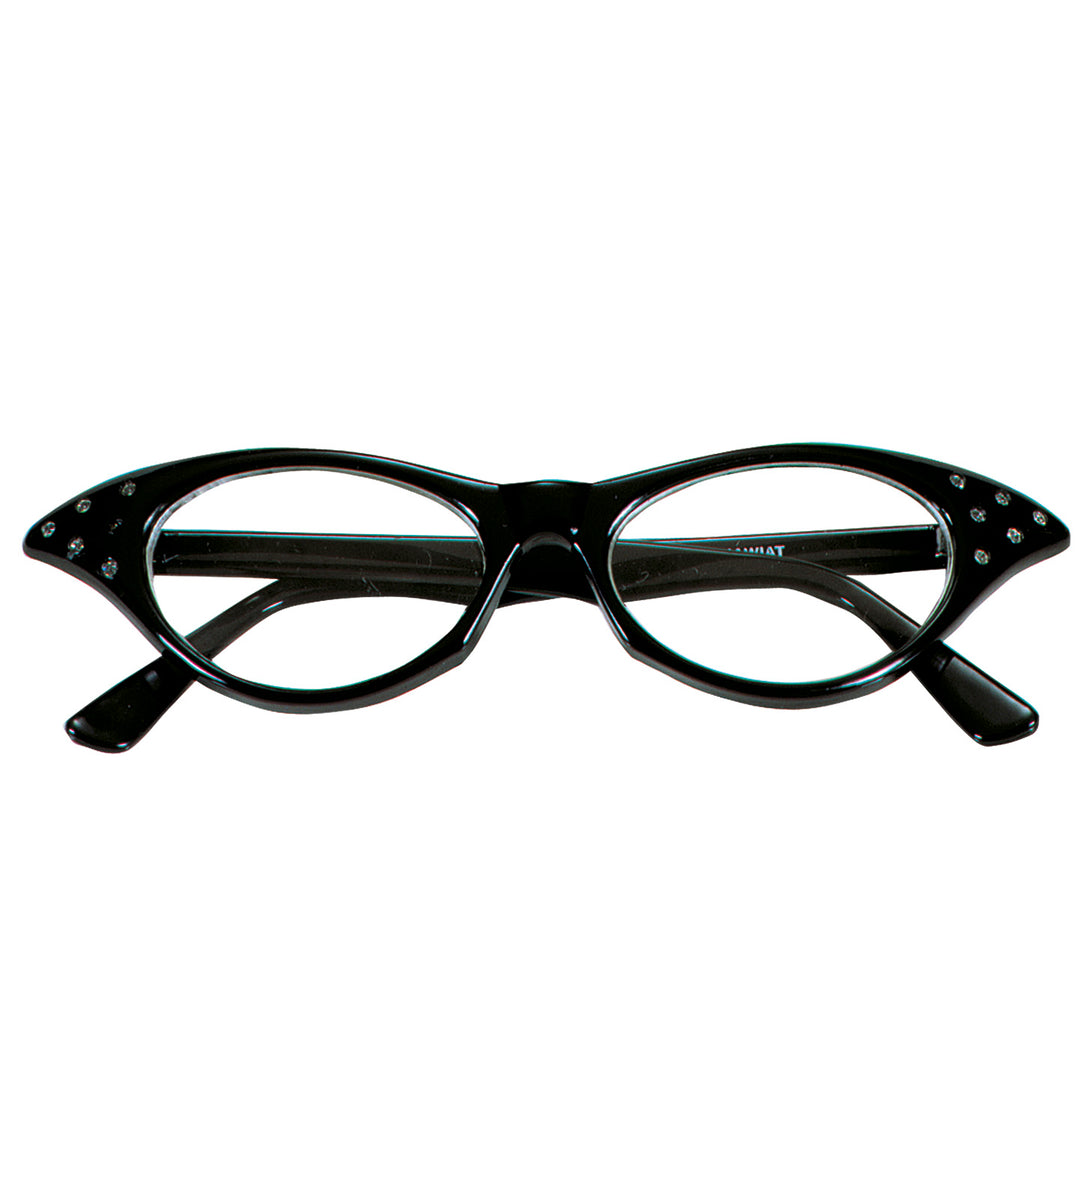 50s GLASSES WITH STRASS - BLACK